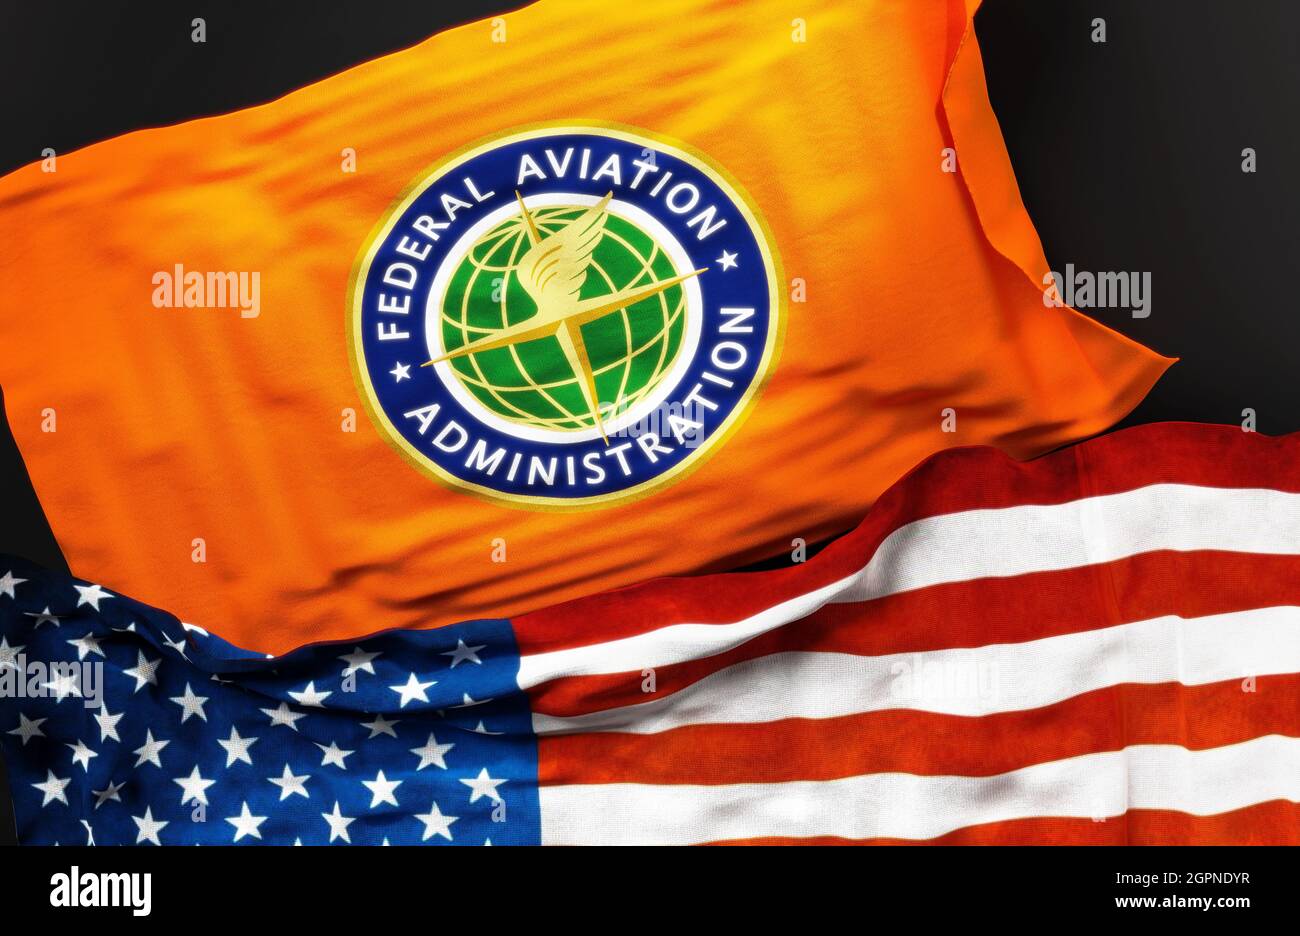 Flag of the United States Federal Aviation Administration along with a flag of the United States of America as a symbol of a connection between them, Stock Photo